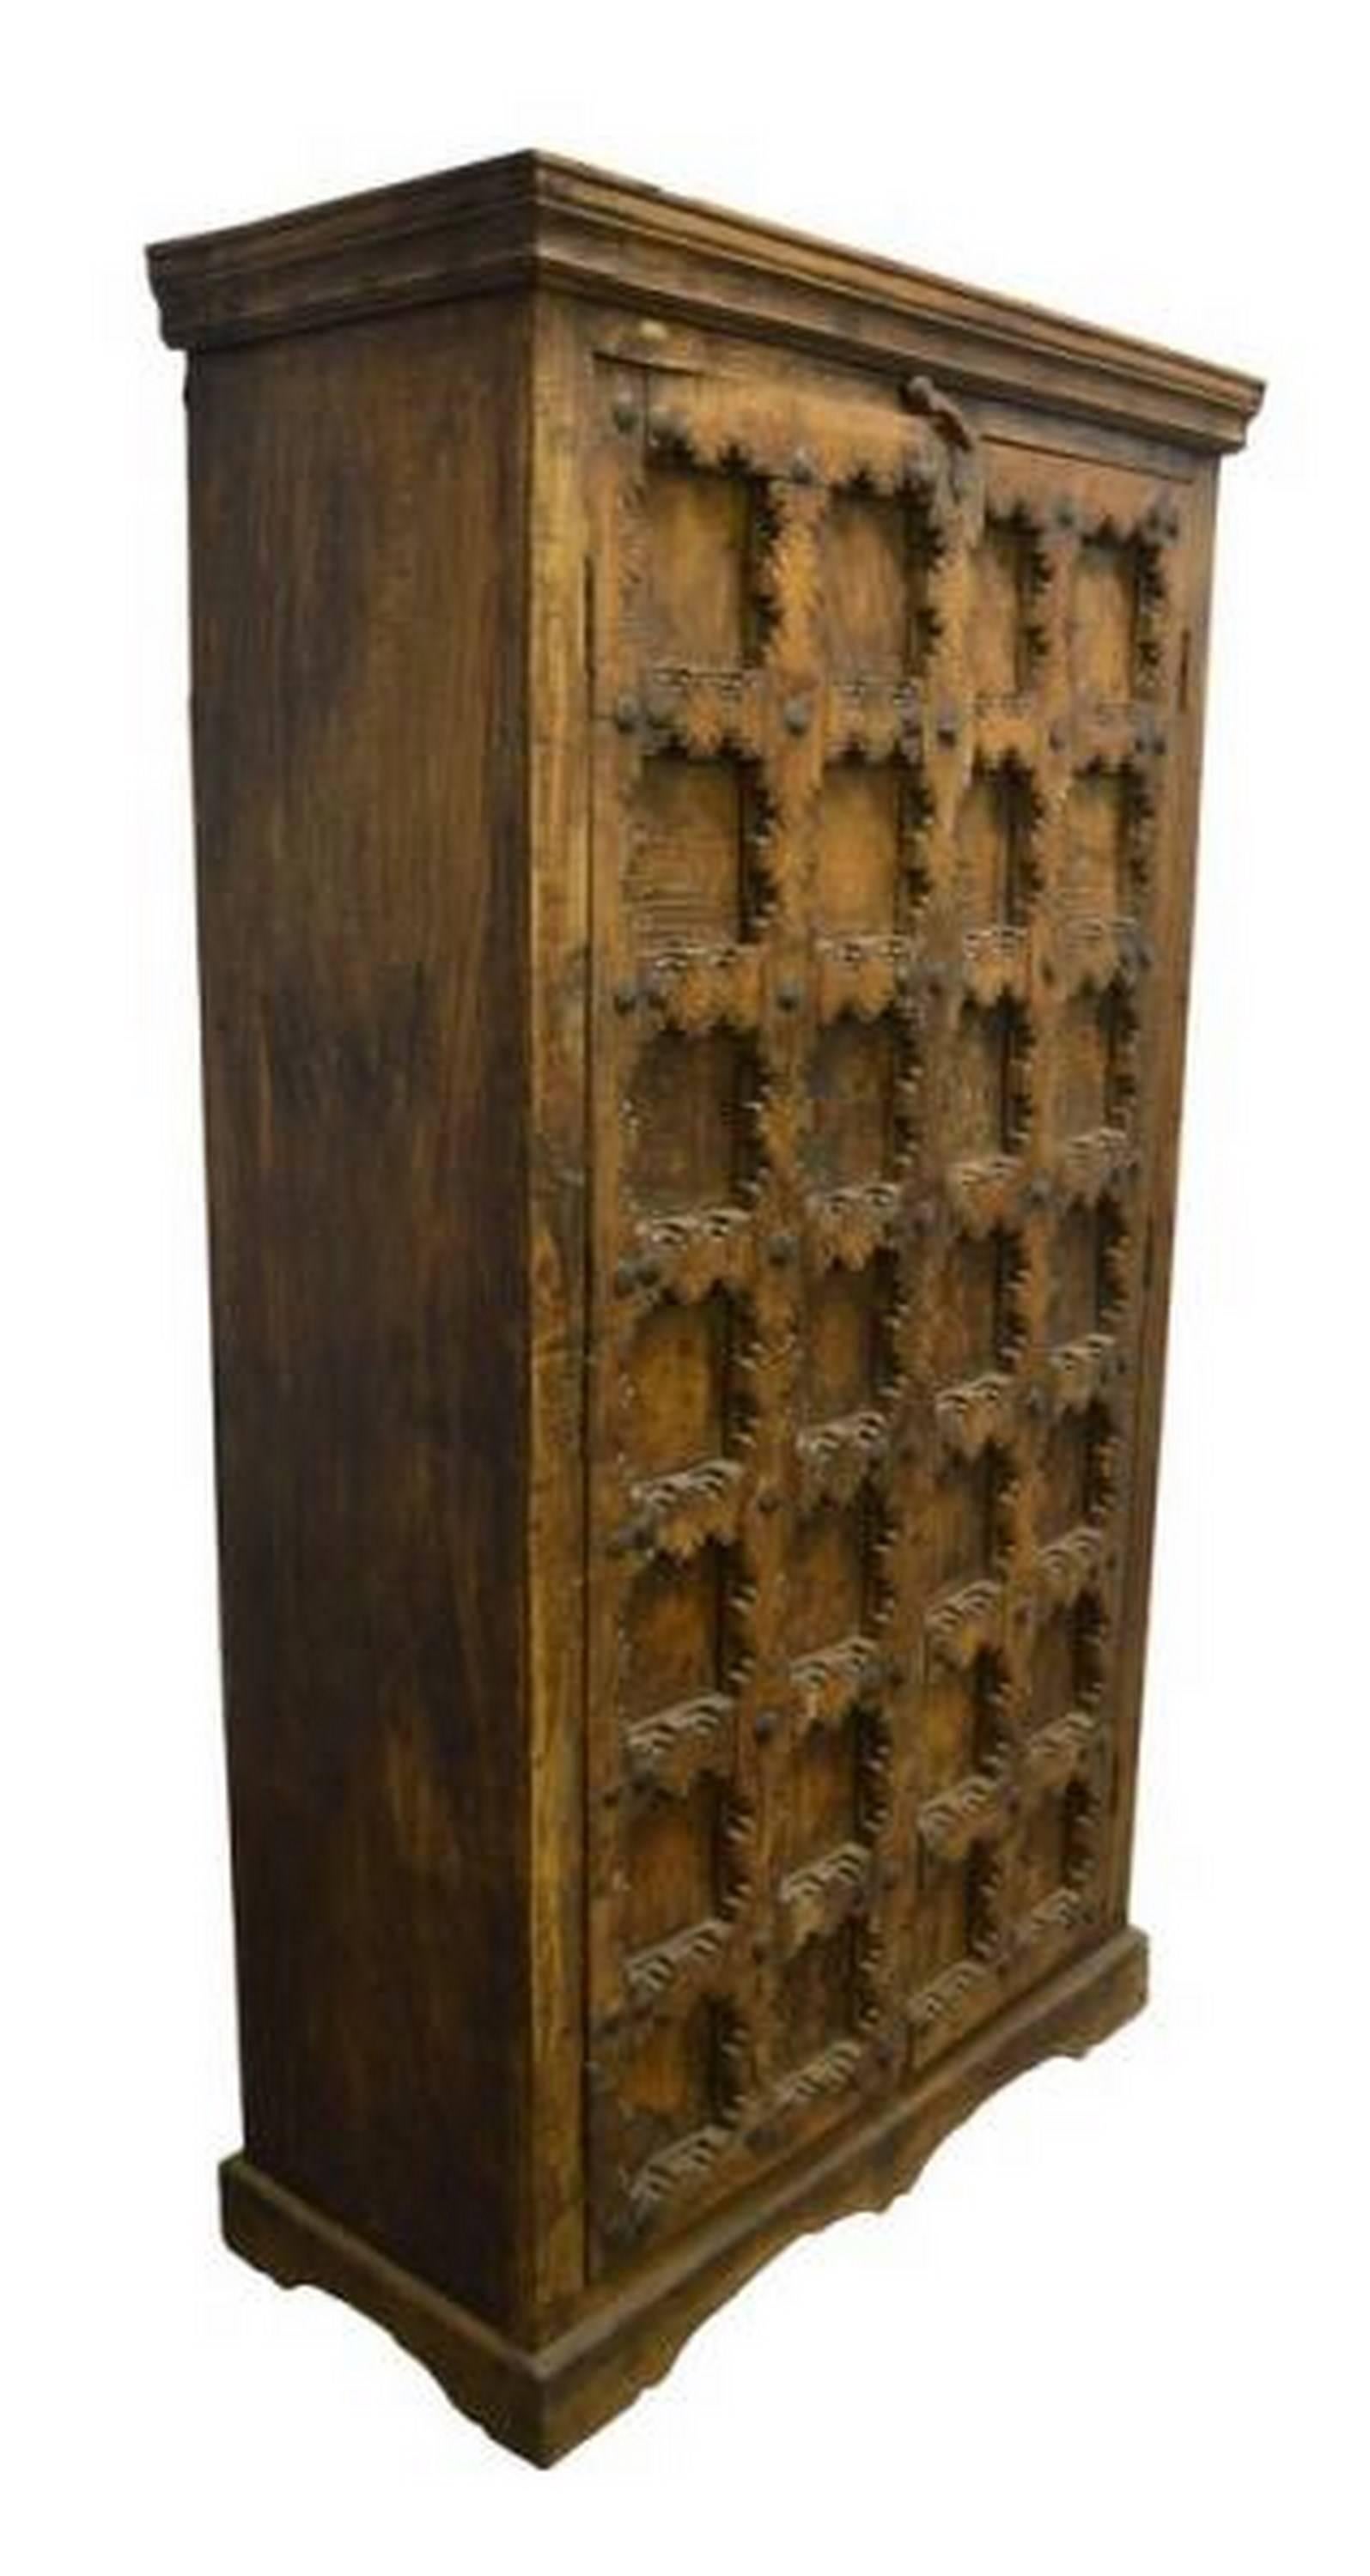 This impressive Indian wooden armoire from the 20th century is made up of a carved skirting board, two hand-carved doors and a molding on its top. The doors are nicely adorned with traditional Indian motifs of dentate squares, creating a splendid